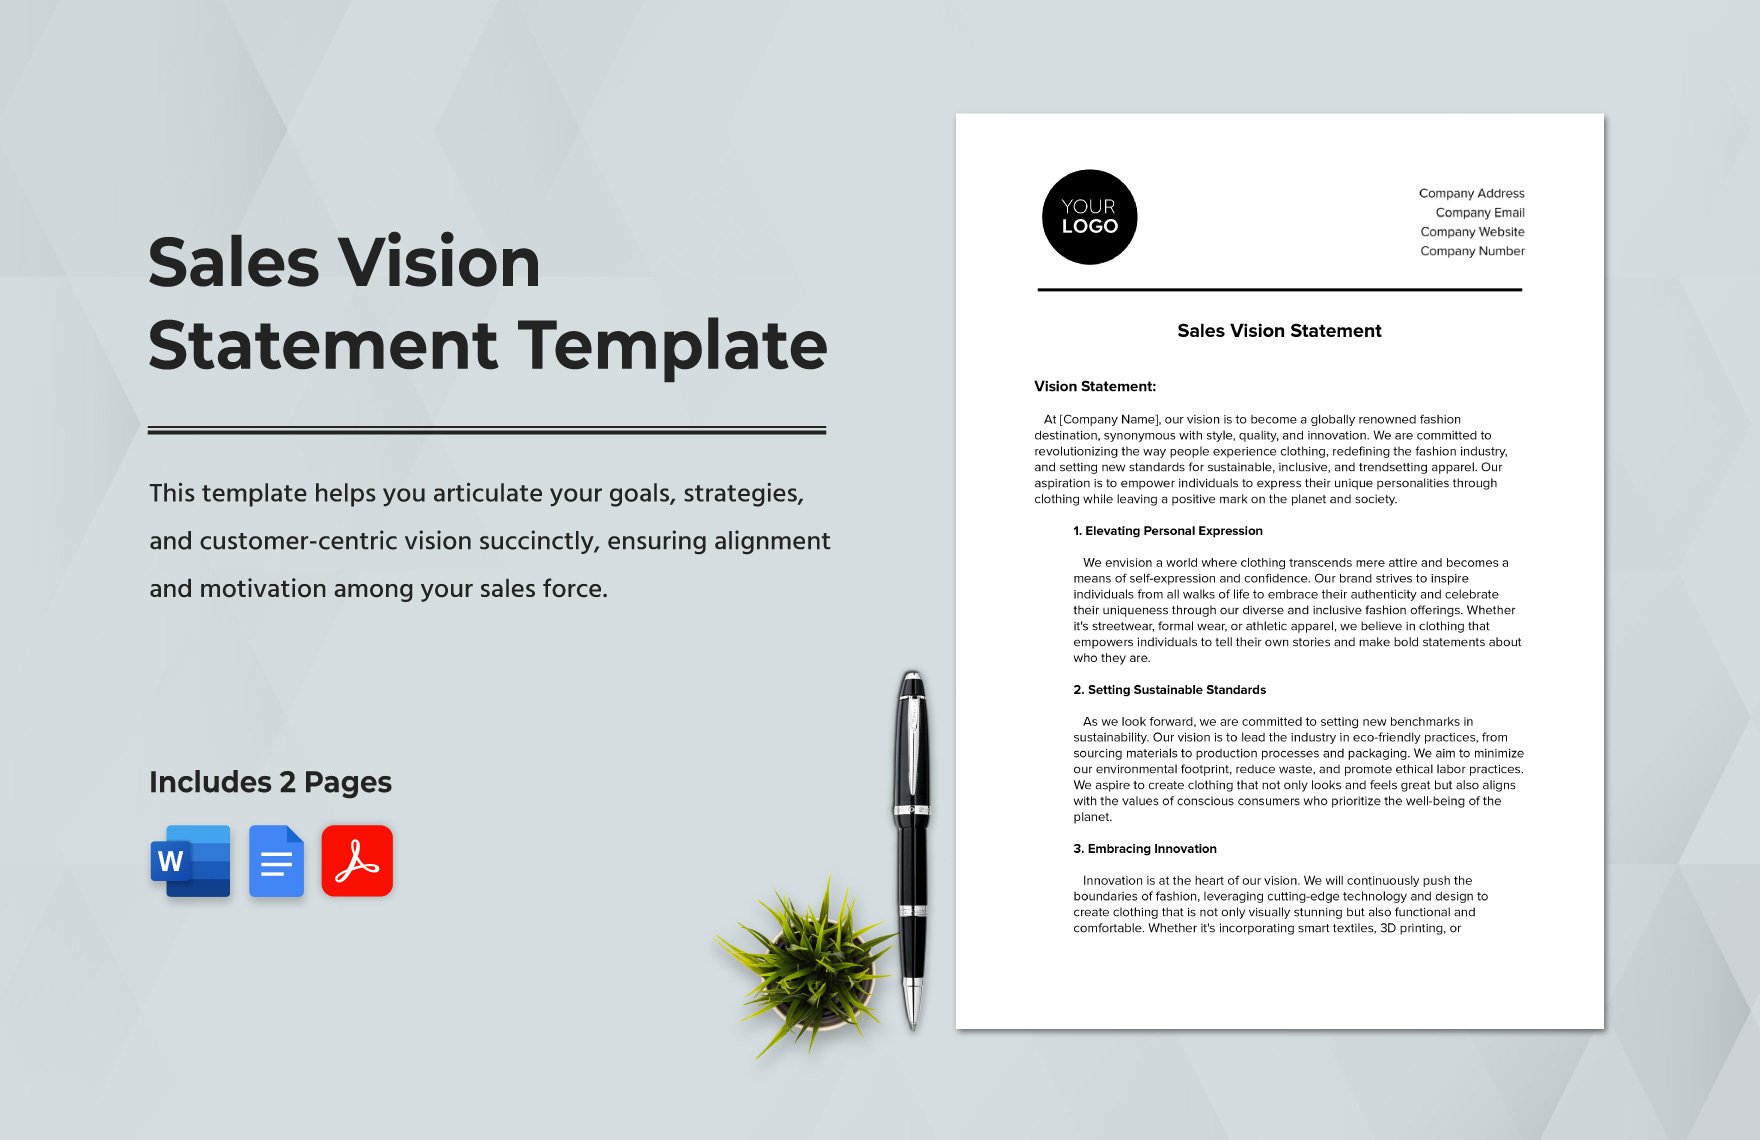 Sales Vision Statement Template in Word, Google Docs, PDF